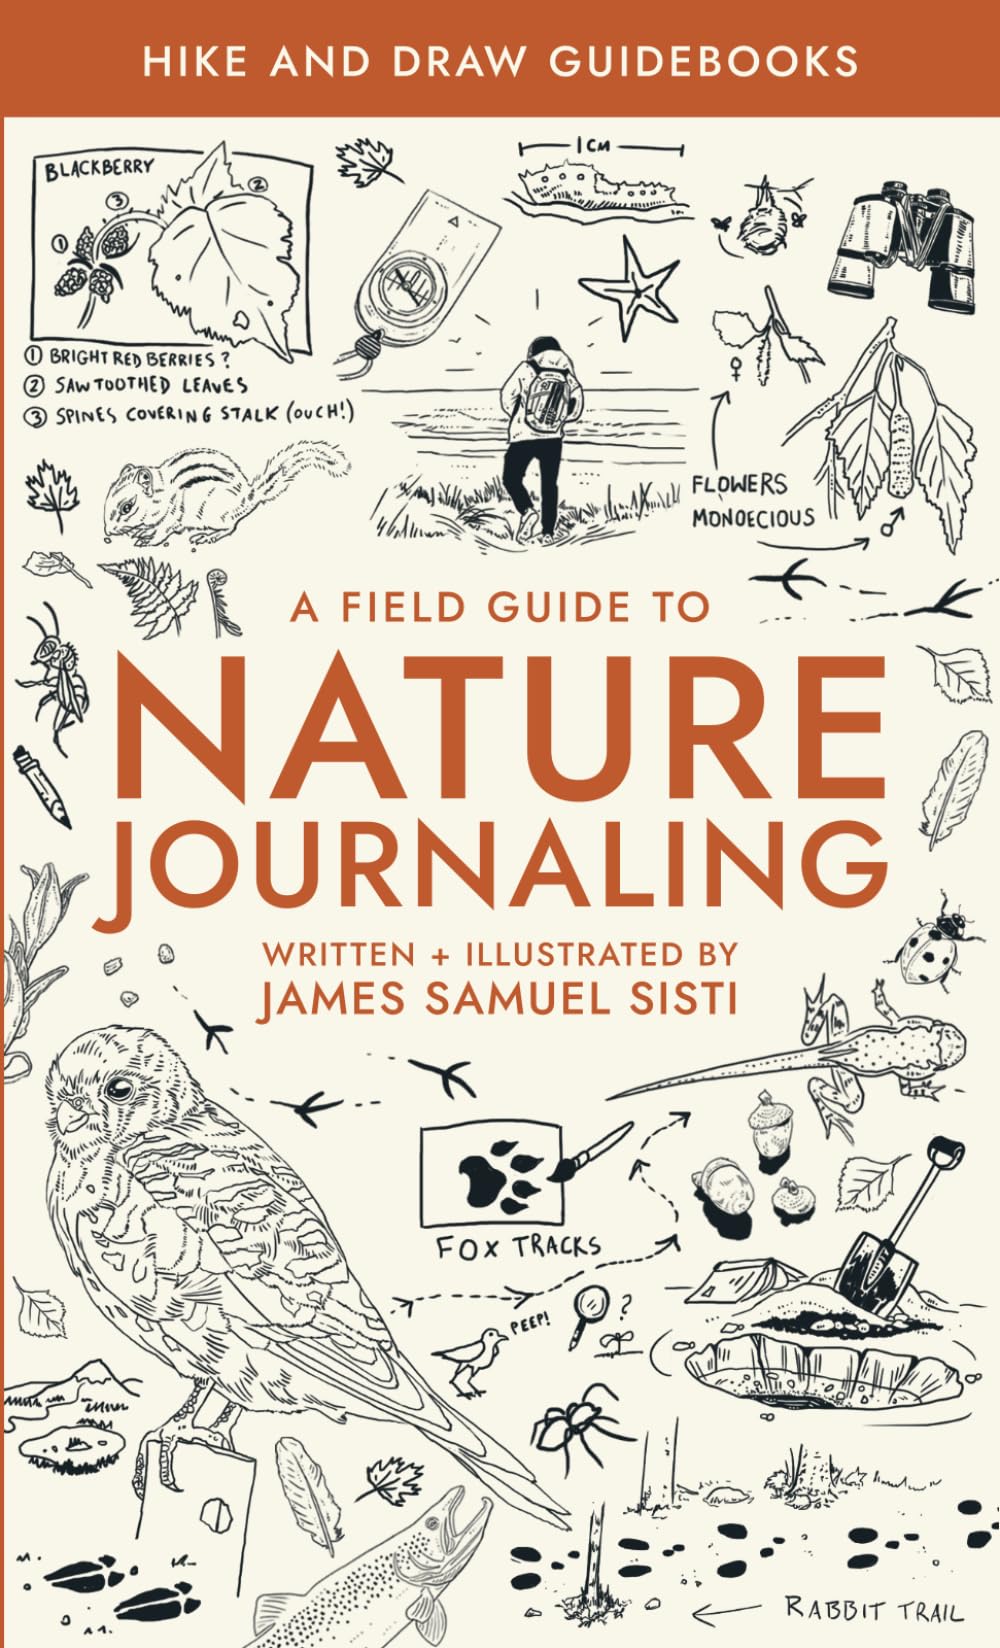 A Field Guide to Nature Journaling: Hike And Draw Guide Books